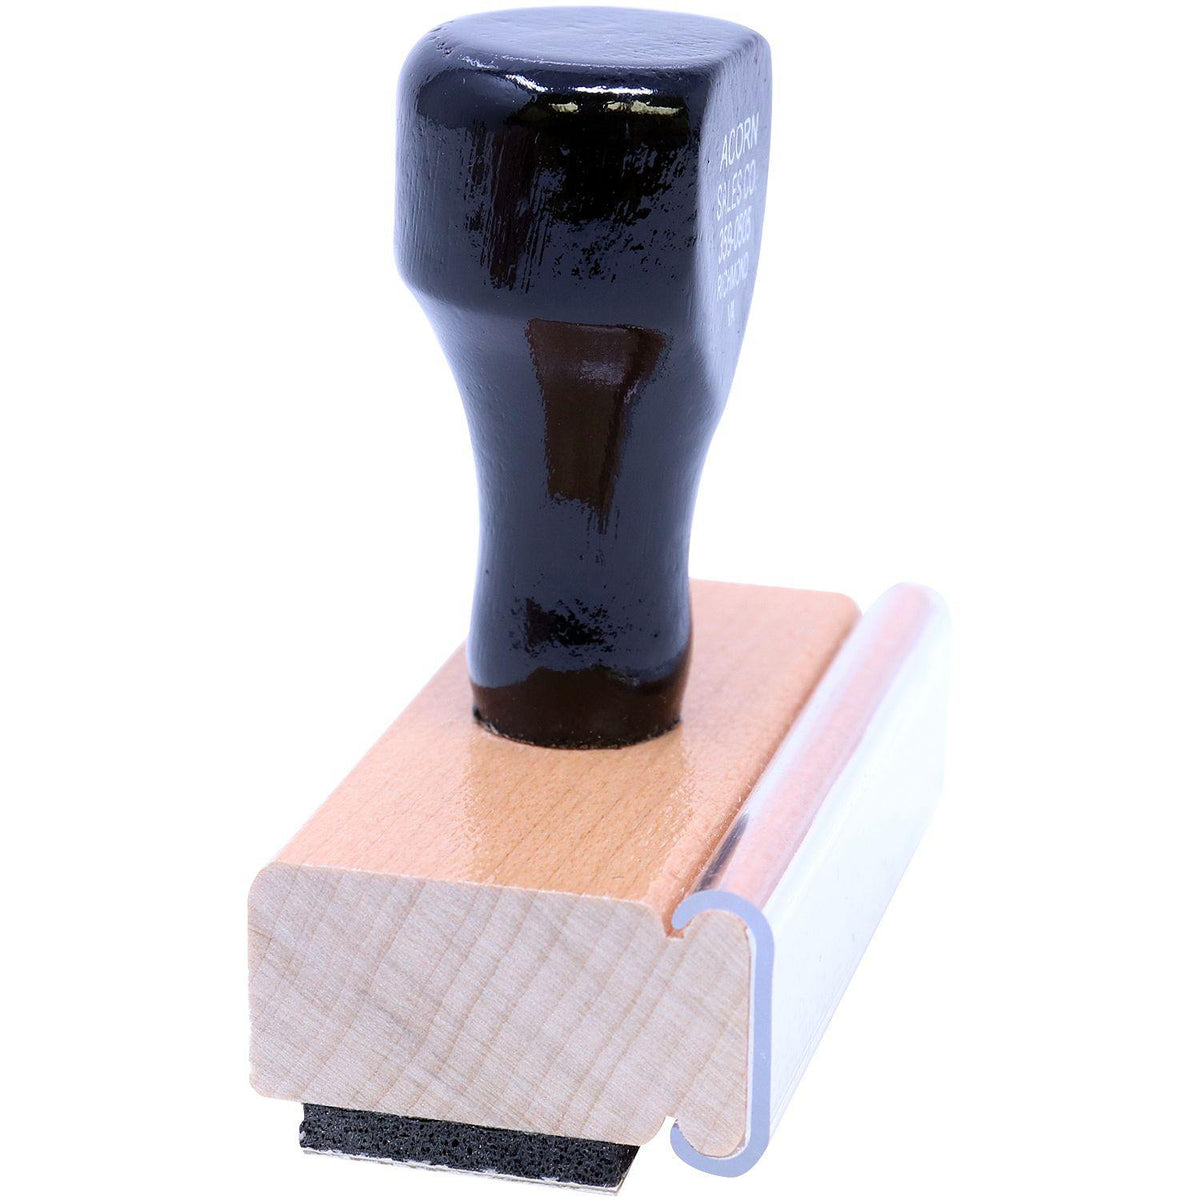 Side View of Large Bold Recibido Rubber Stamp at an Angle